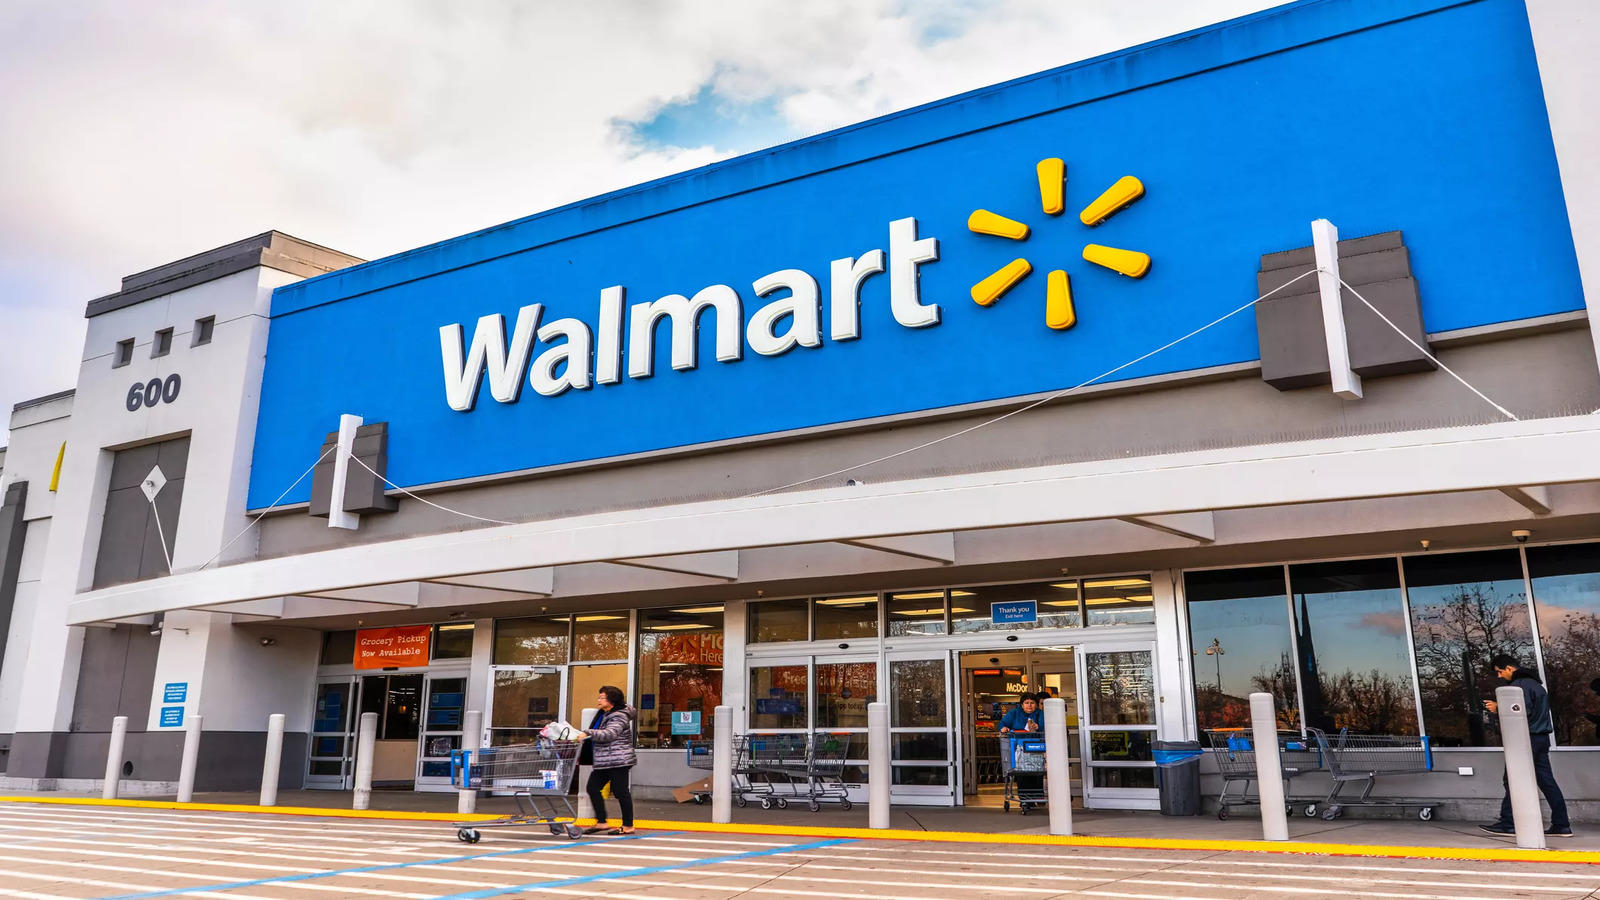 Walmart's New Strategy Wins Over Wealthy Shoppers Amid Retail Challenges